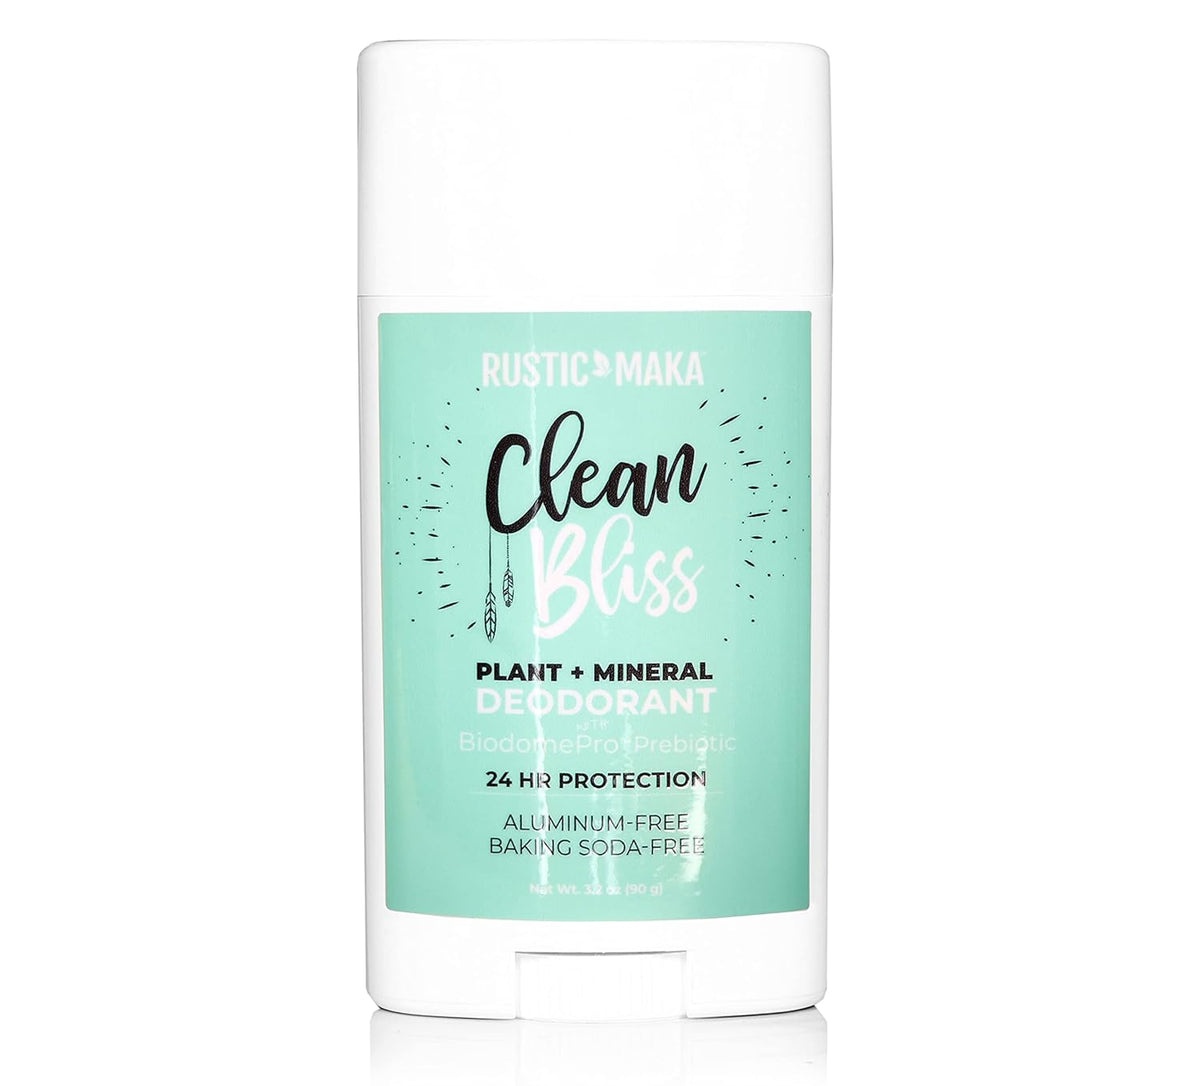 Clean Bliss Plant + Mineral Deodorant